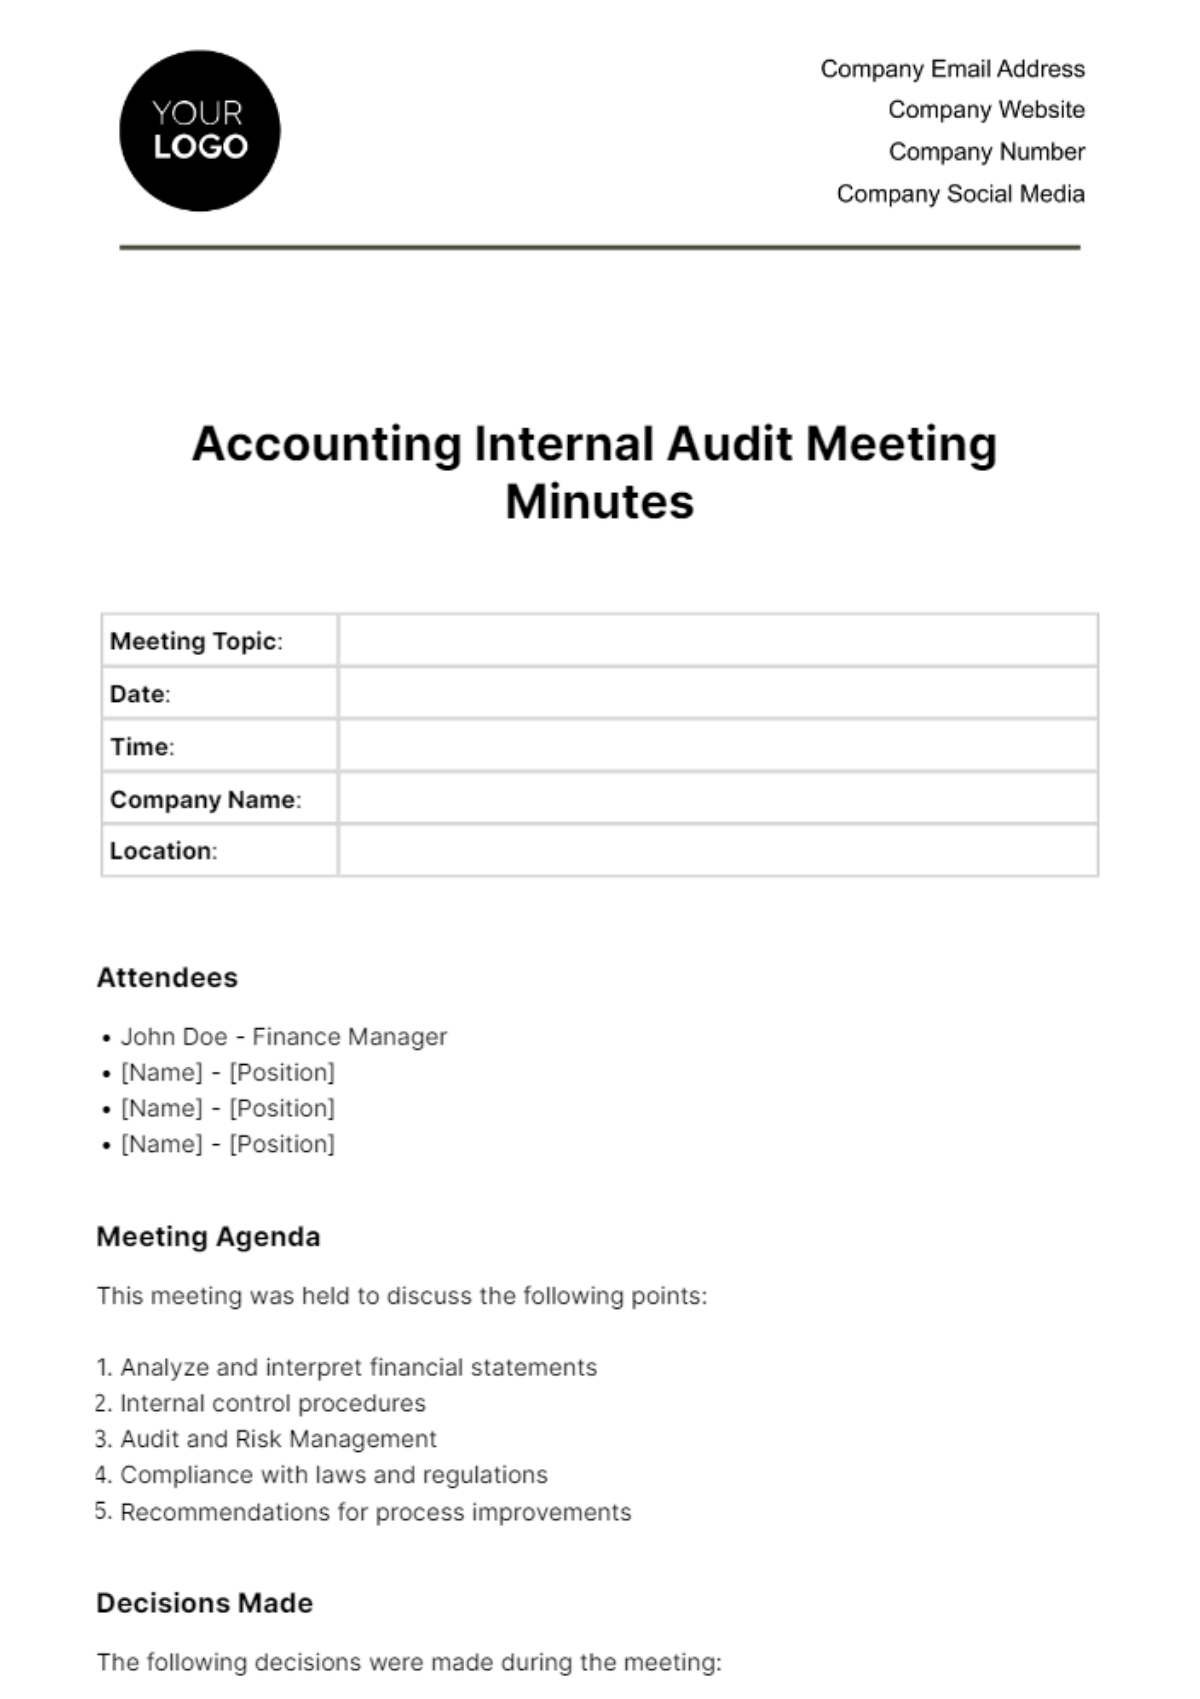 Free Accounting Internal Audit Meeting Minute Template